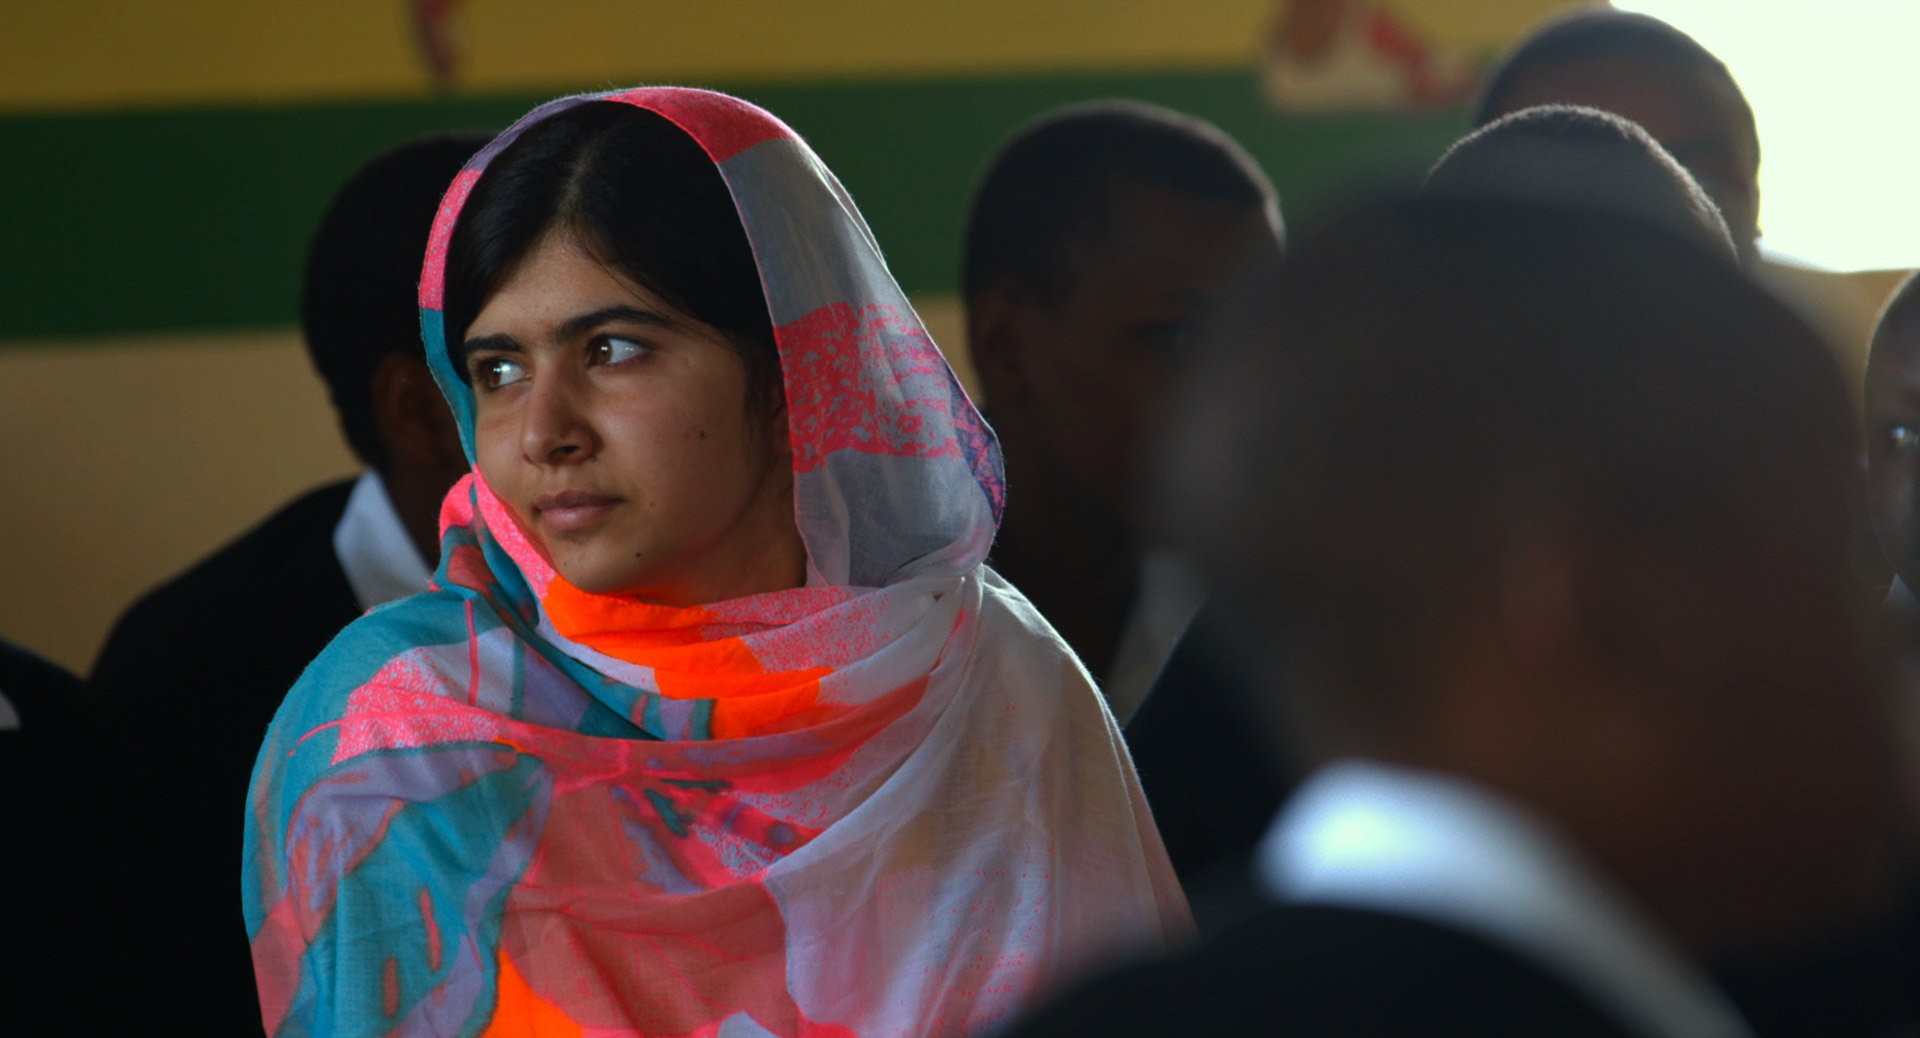 Malala Yousafzai stars as Herself in Fox Searchlight Pictures' He Named Me Malala (2015)